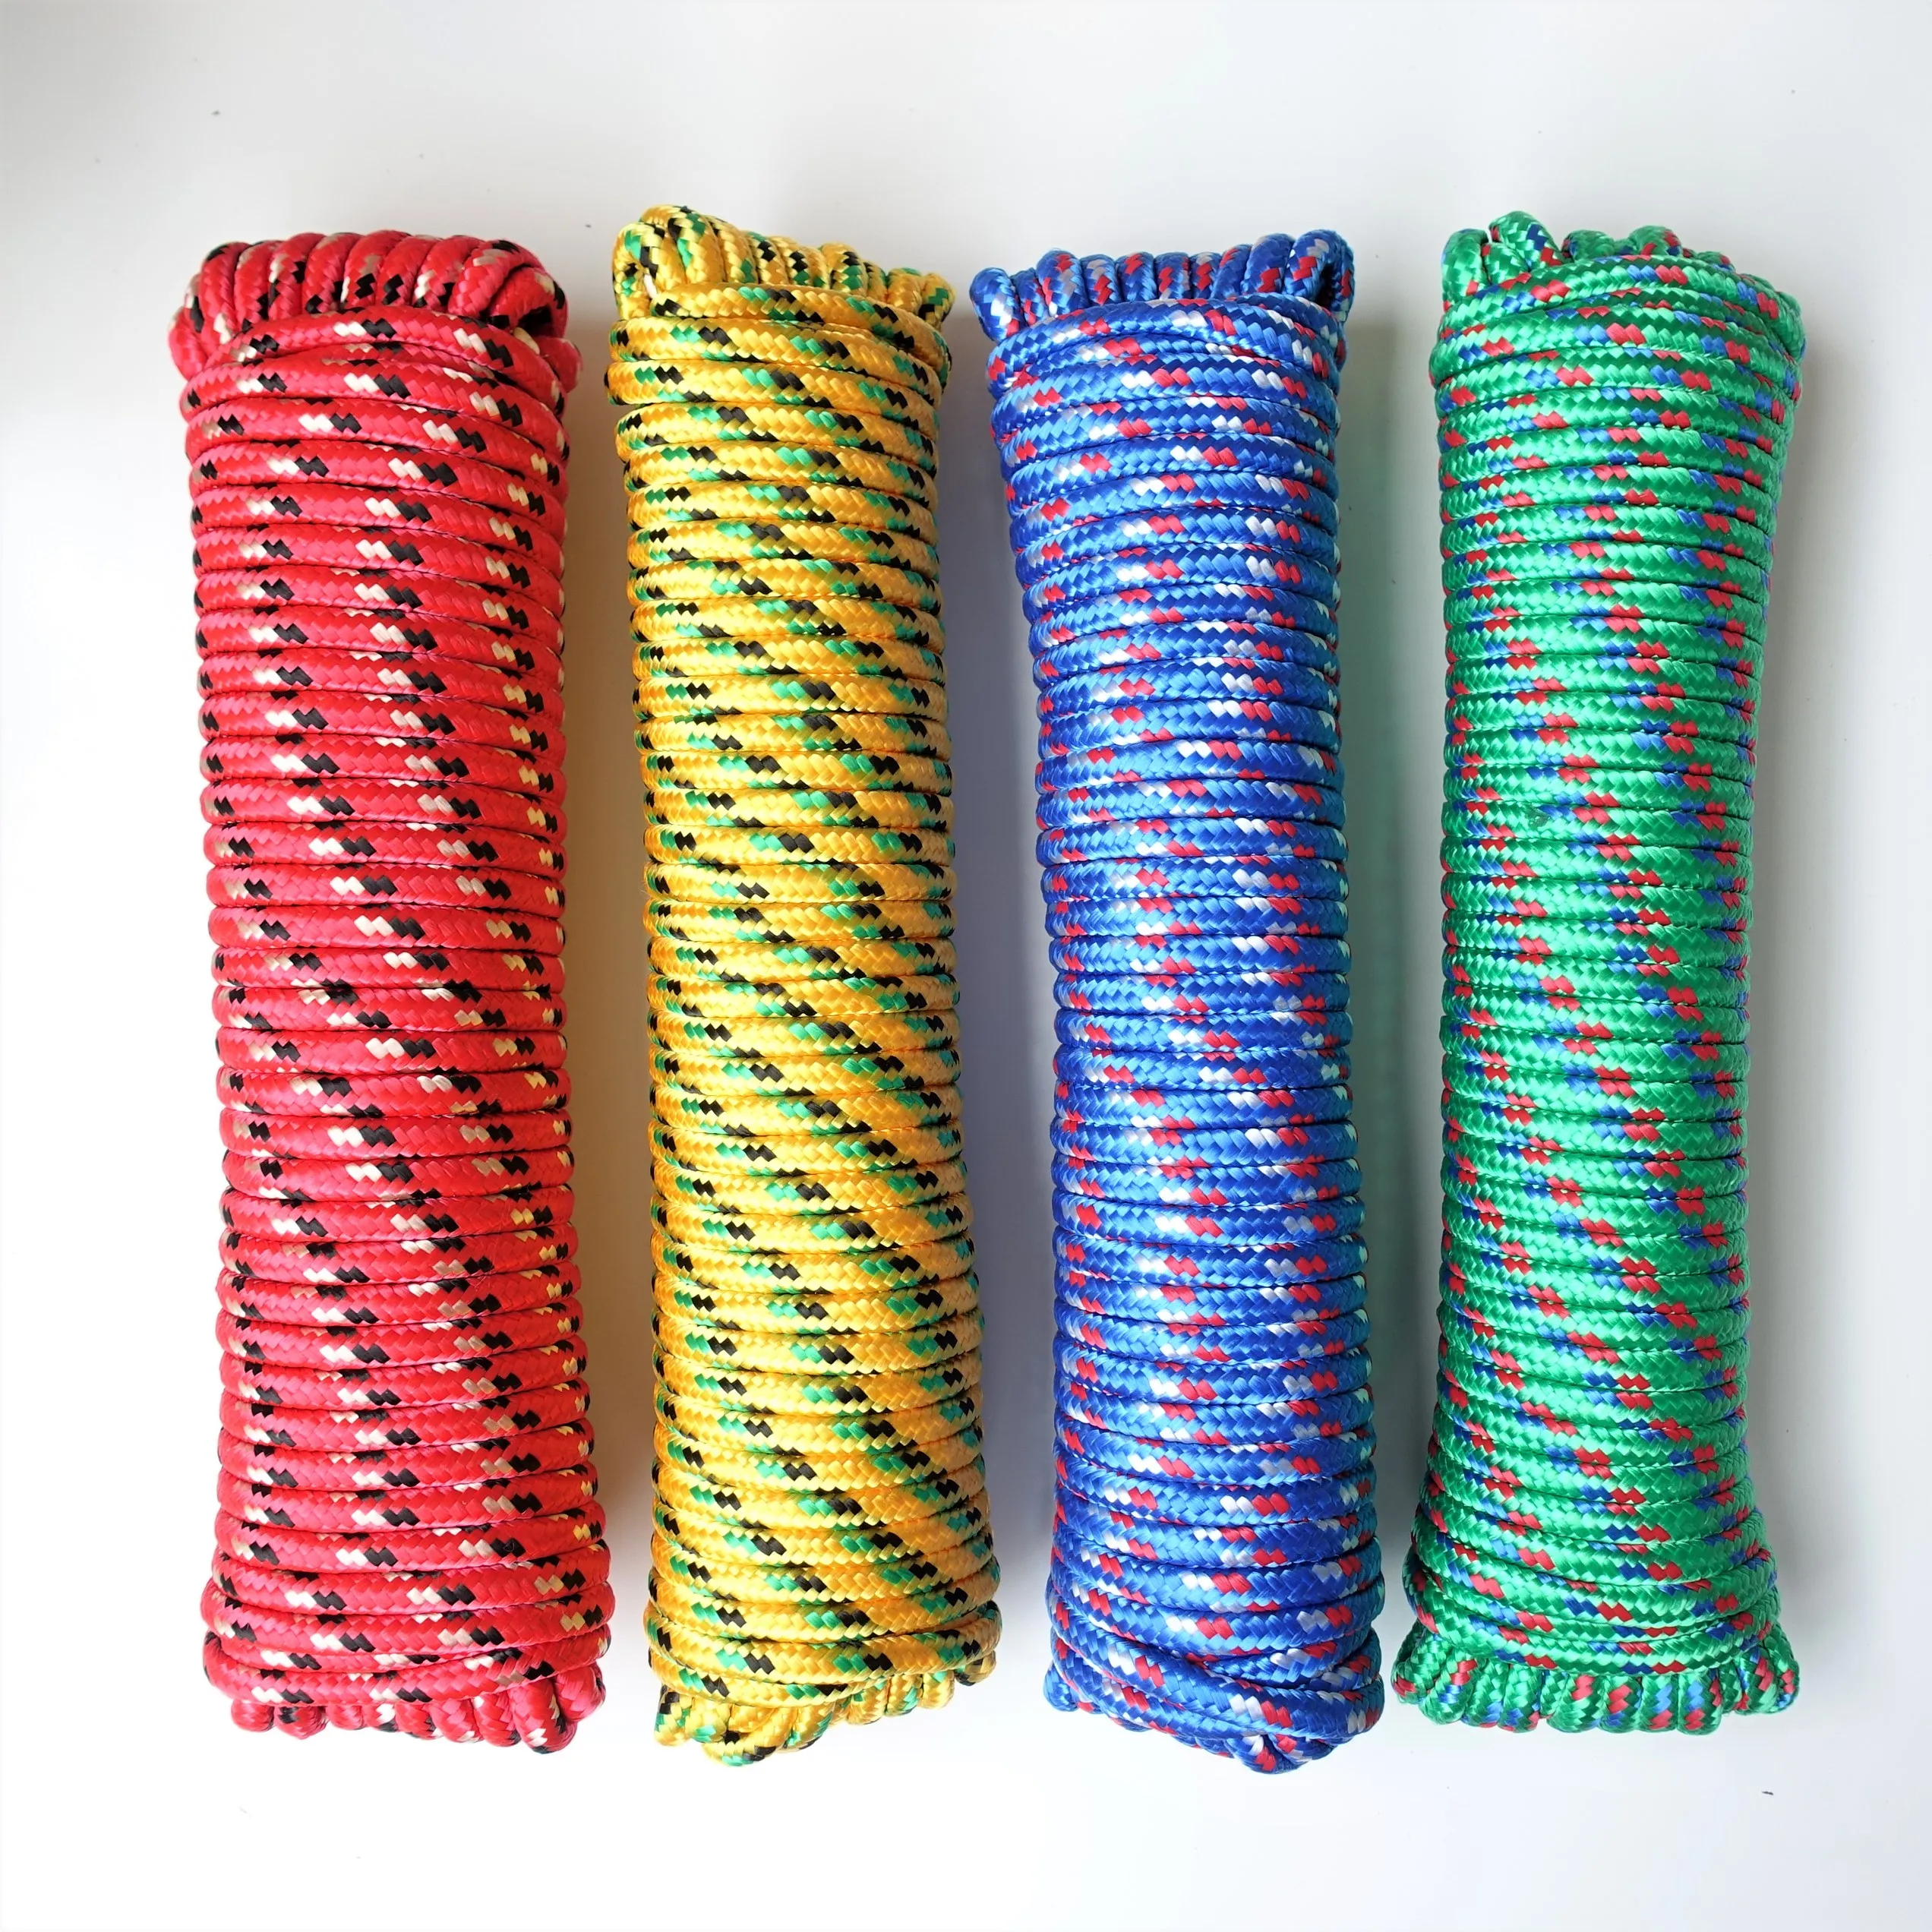 16 yard 3/8" in Rope Multi Purpose Clothesline Camping Cord Braided Tie String 